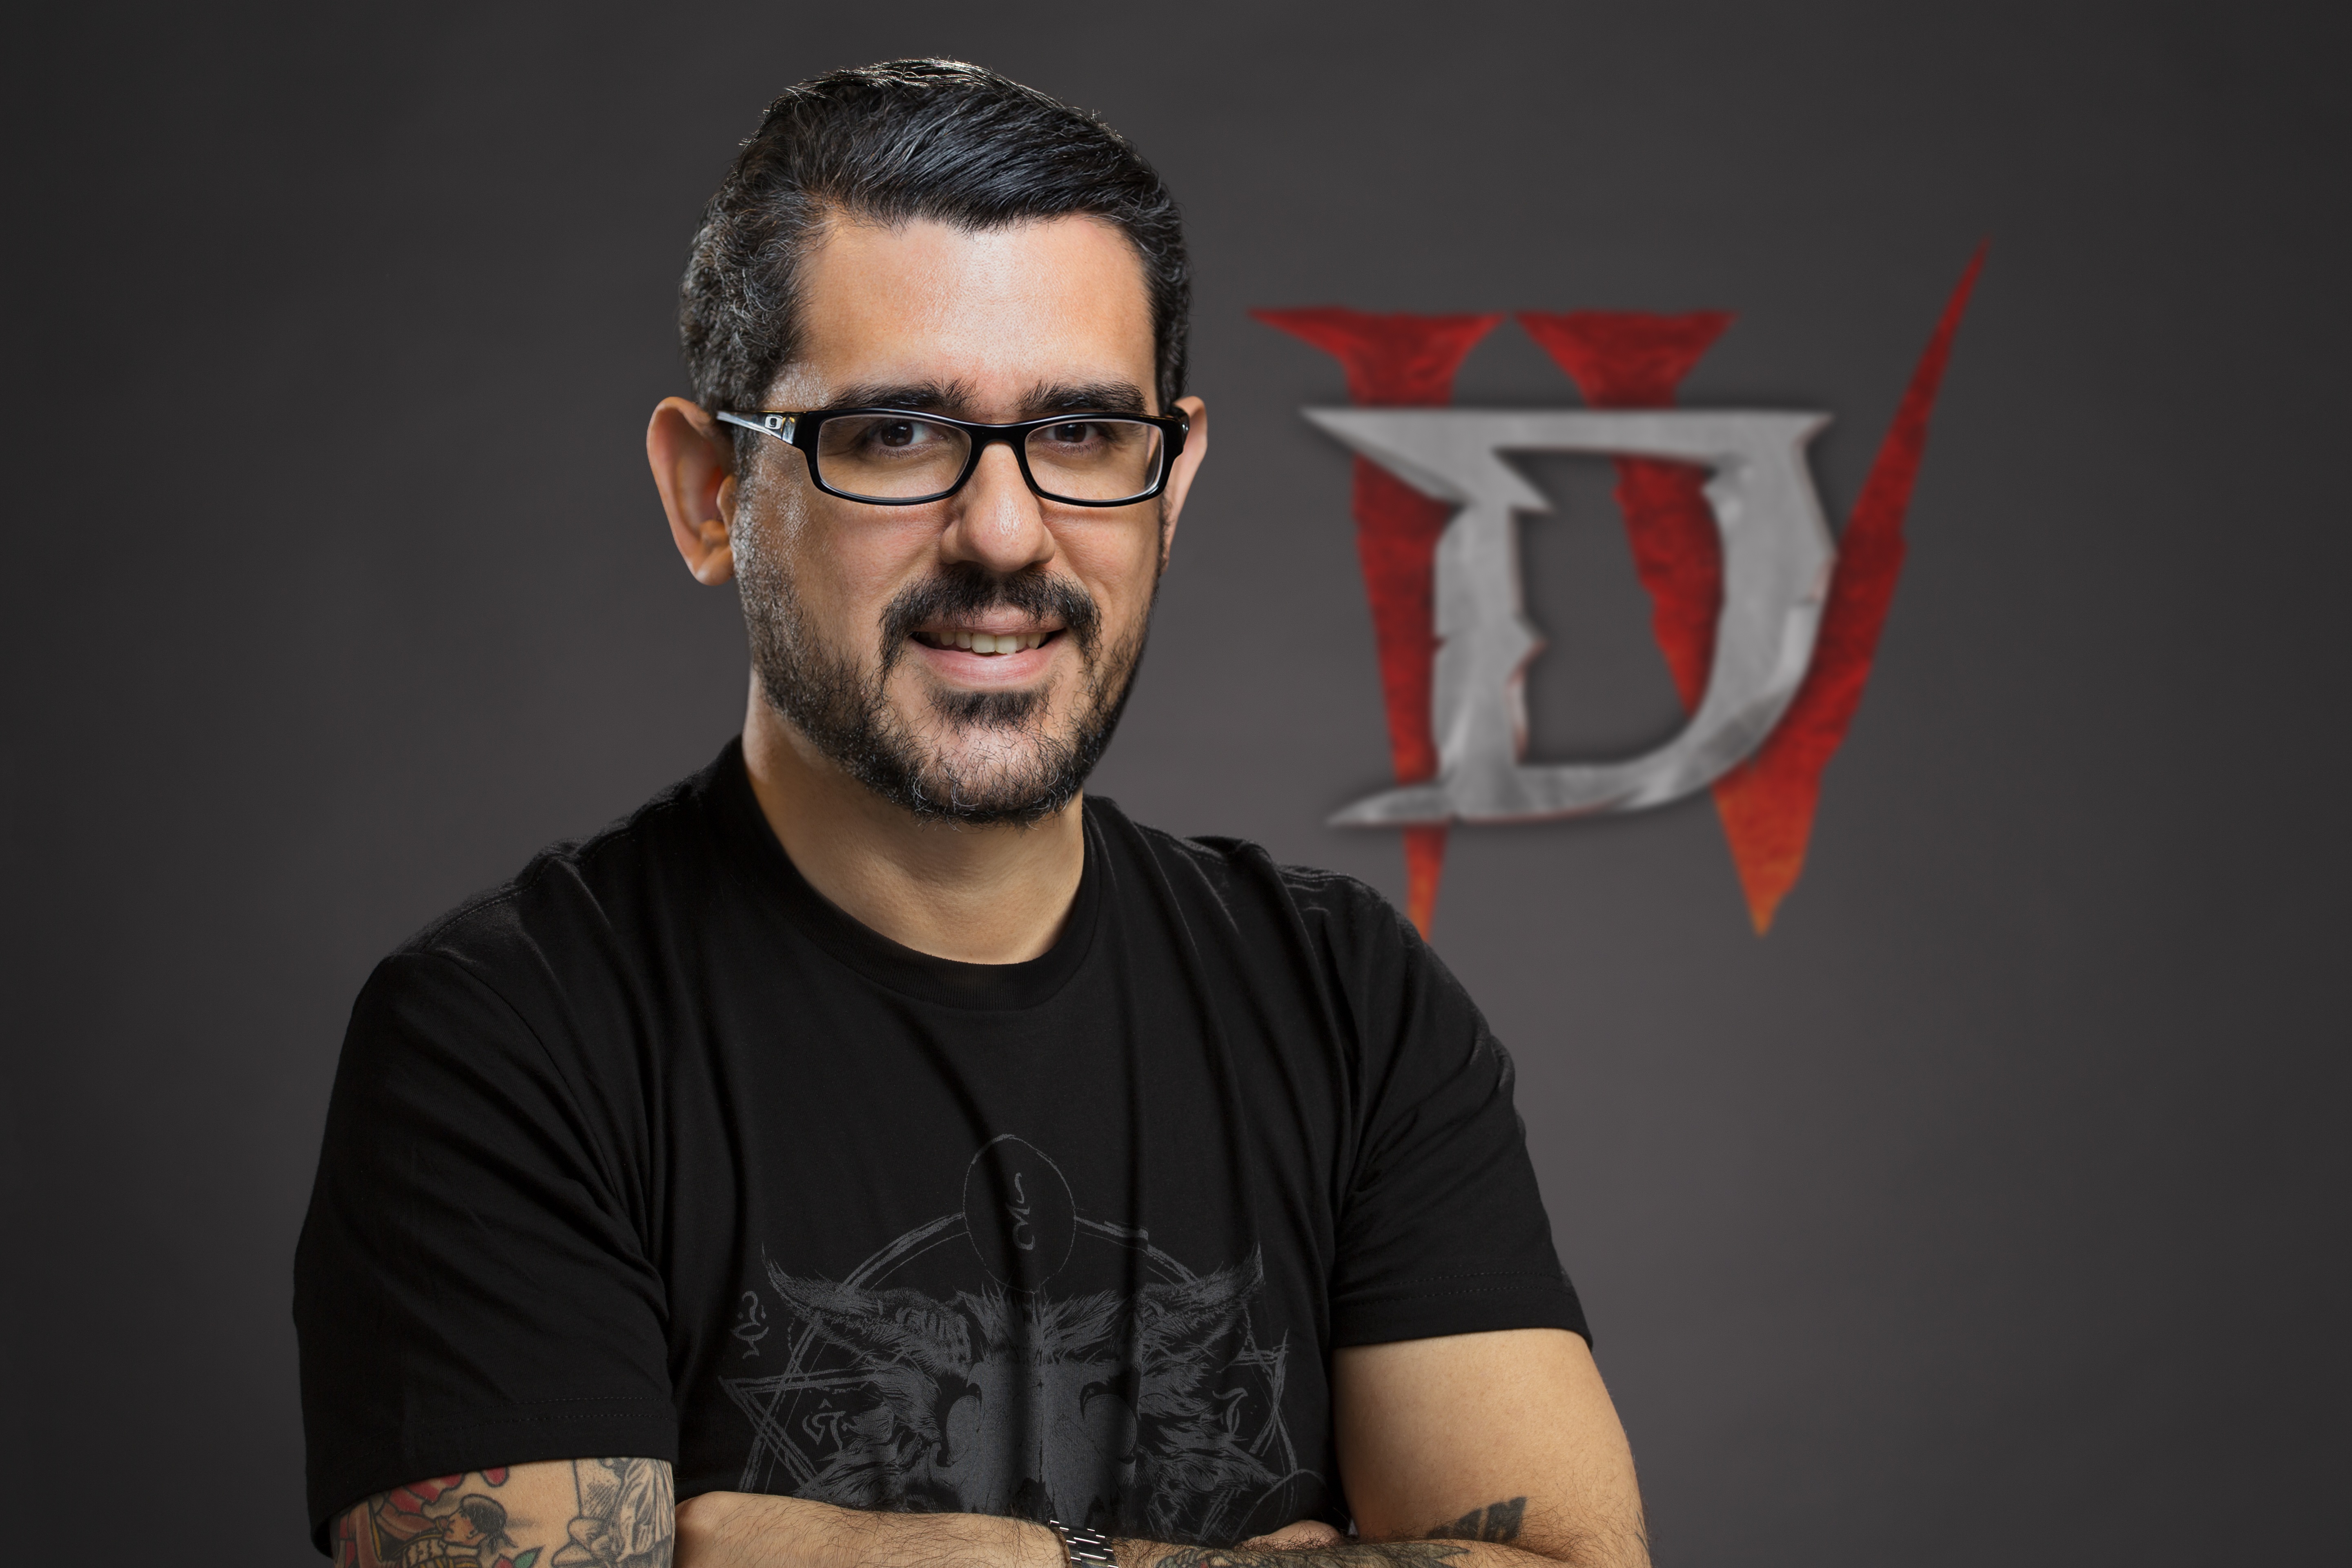 Luis Barriga is the director of Diablo IV and is very excited about his open world